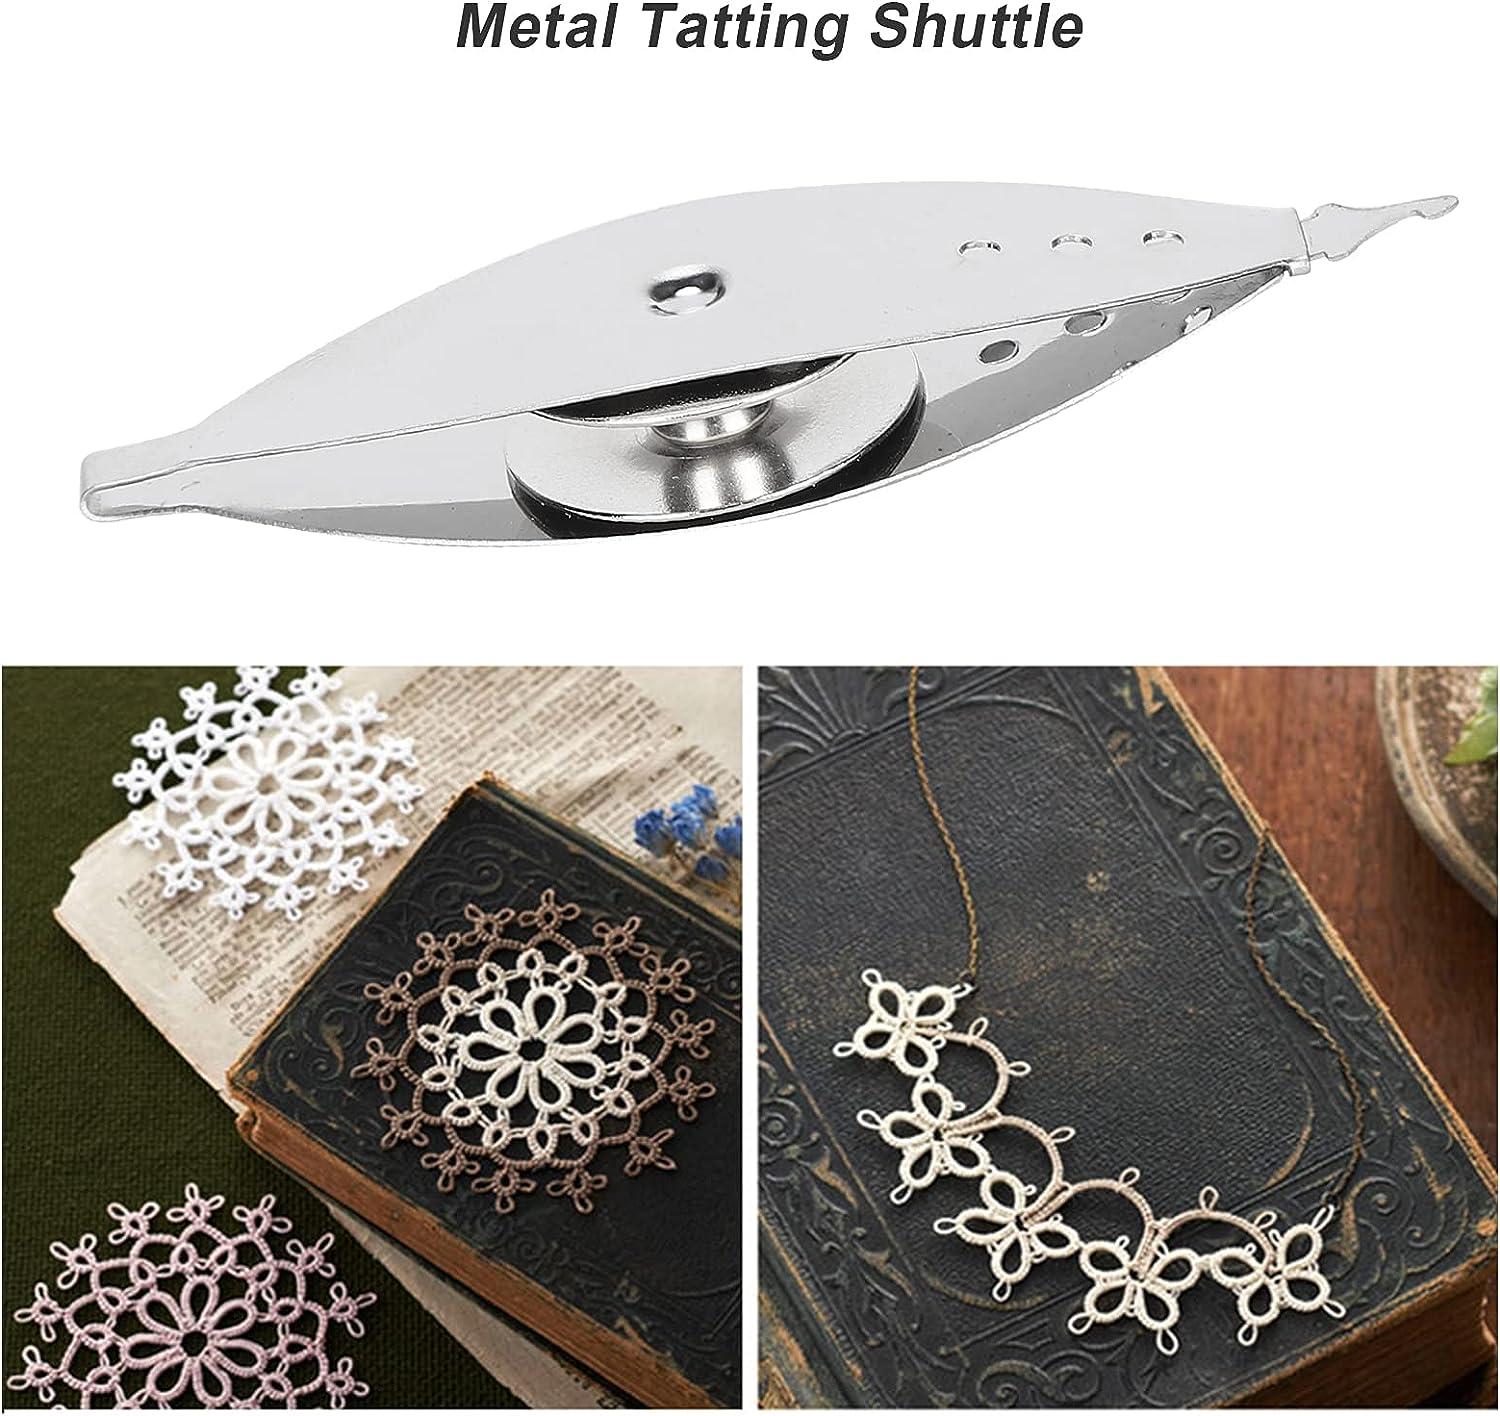 Lace Tatting Shuttle Tools Suitable For Lacemaking And Easy Hand